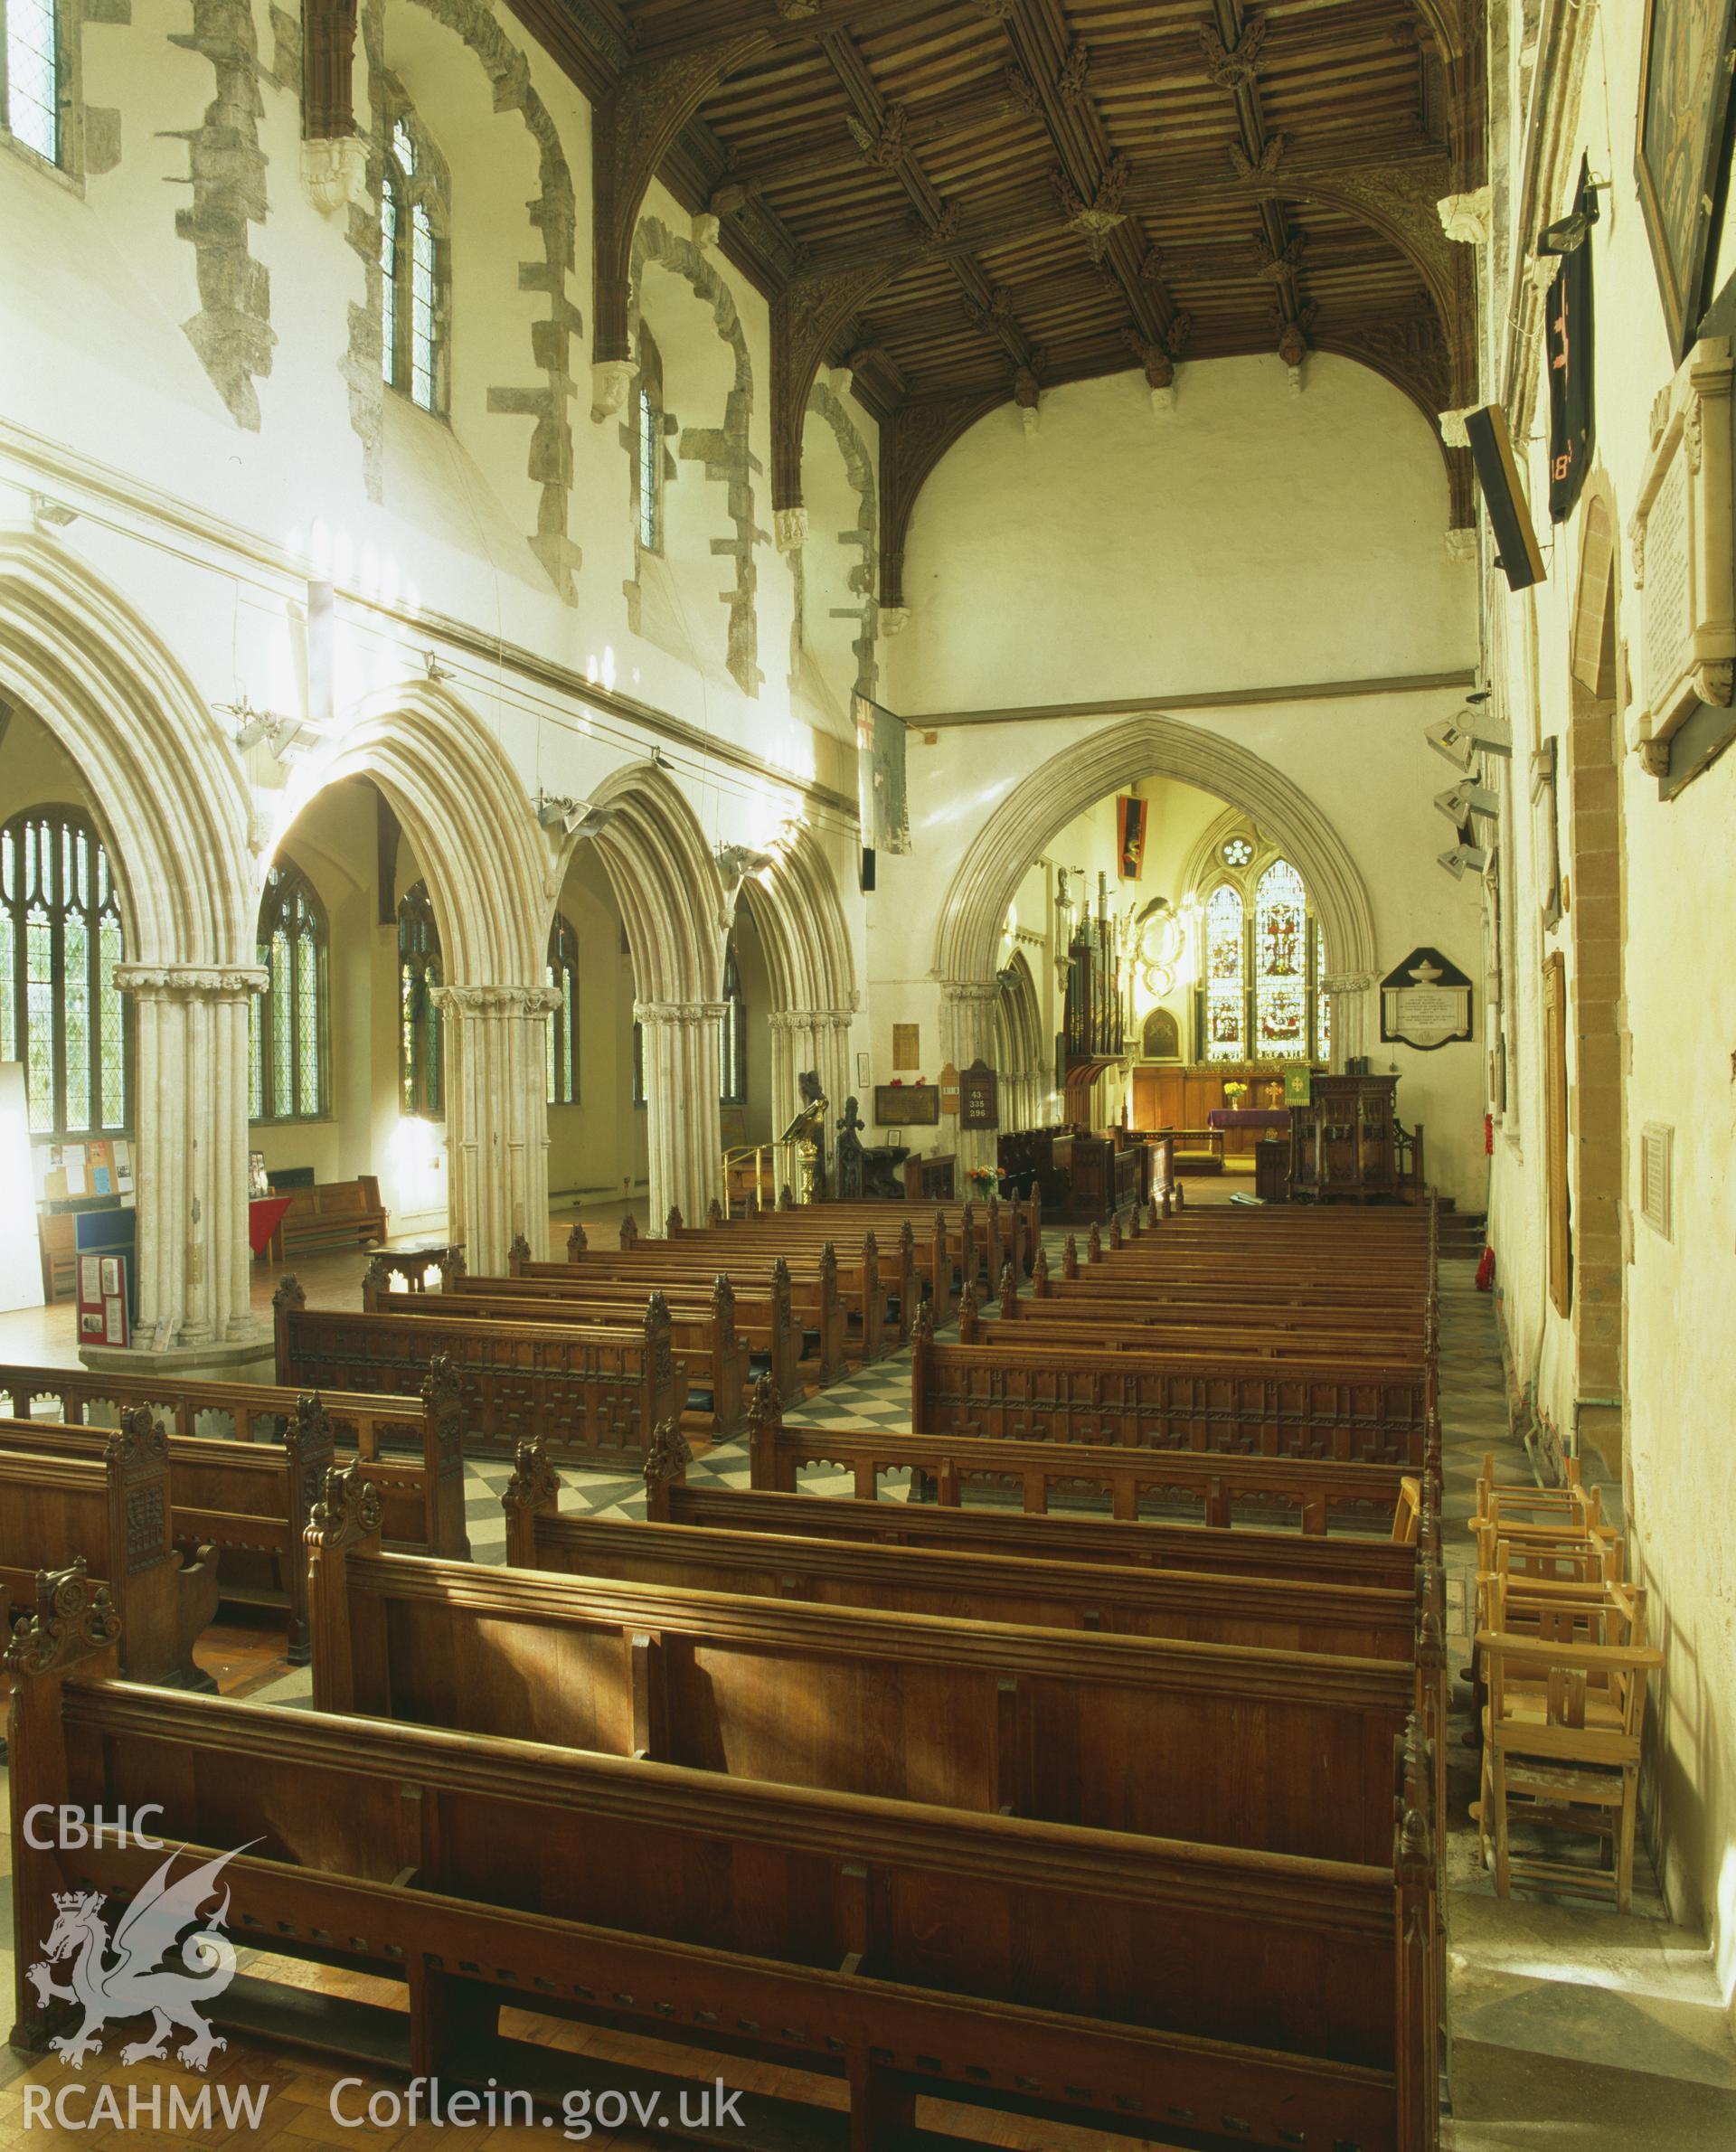 RCAHMW colour transparency showing interior view of St Marys Church, Haverfordwest, taken by Iain Wright, 2003.